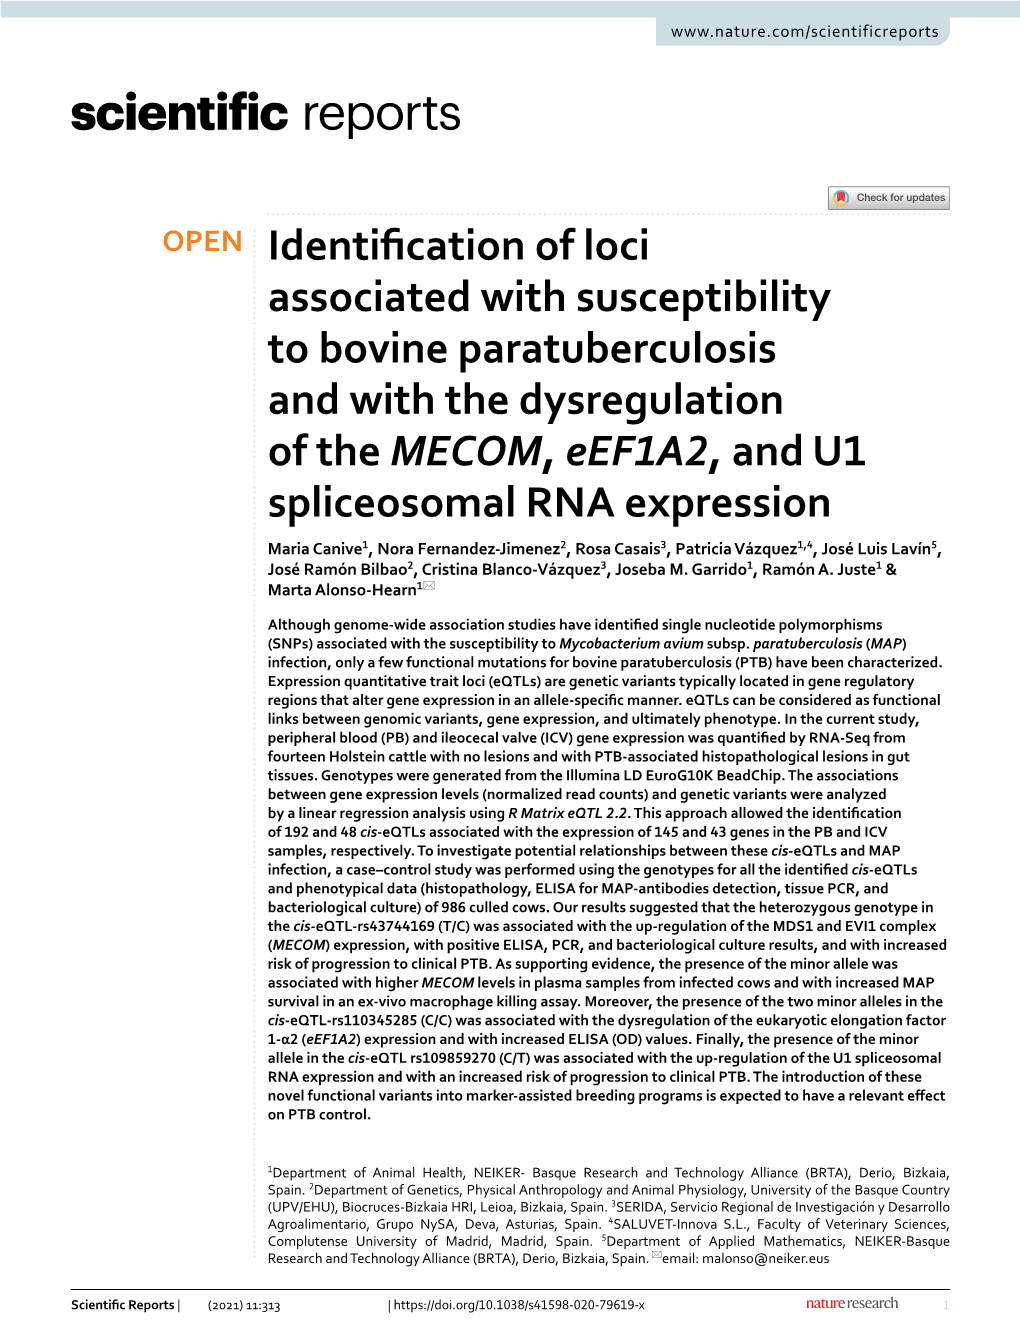 Identification of Loci Associated with Susceptibility to Bovine Paratuberculosis and with the Dysregulation of the MECOM, Eef1a2